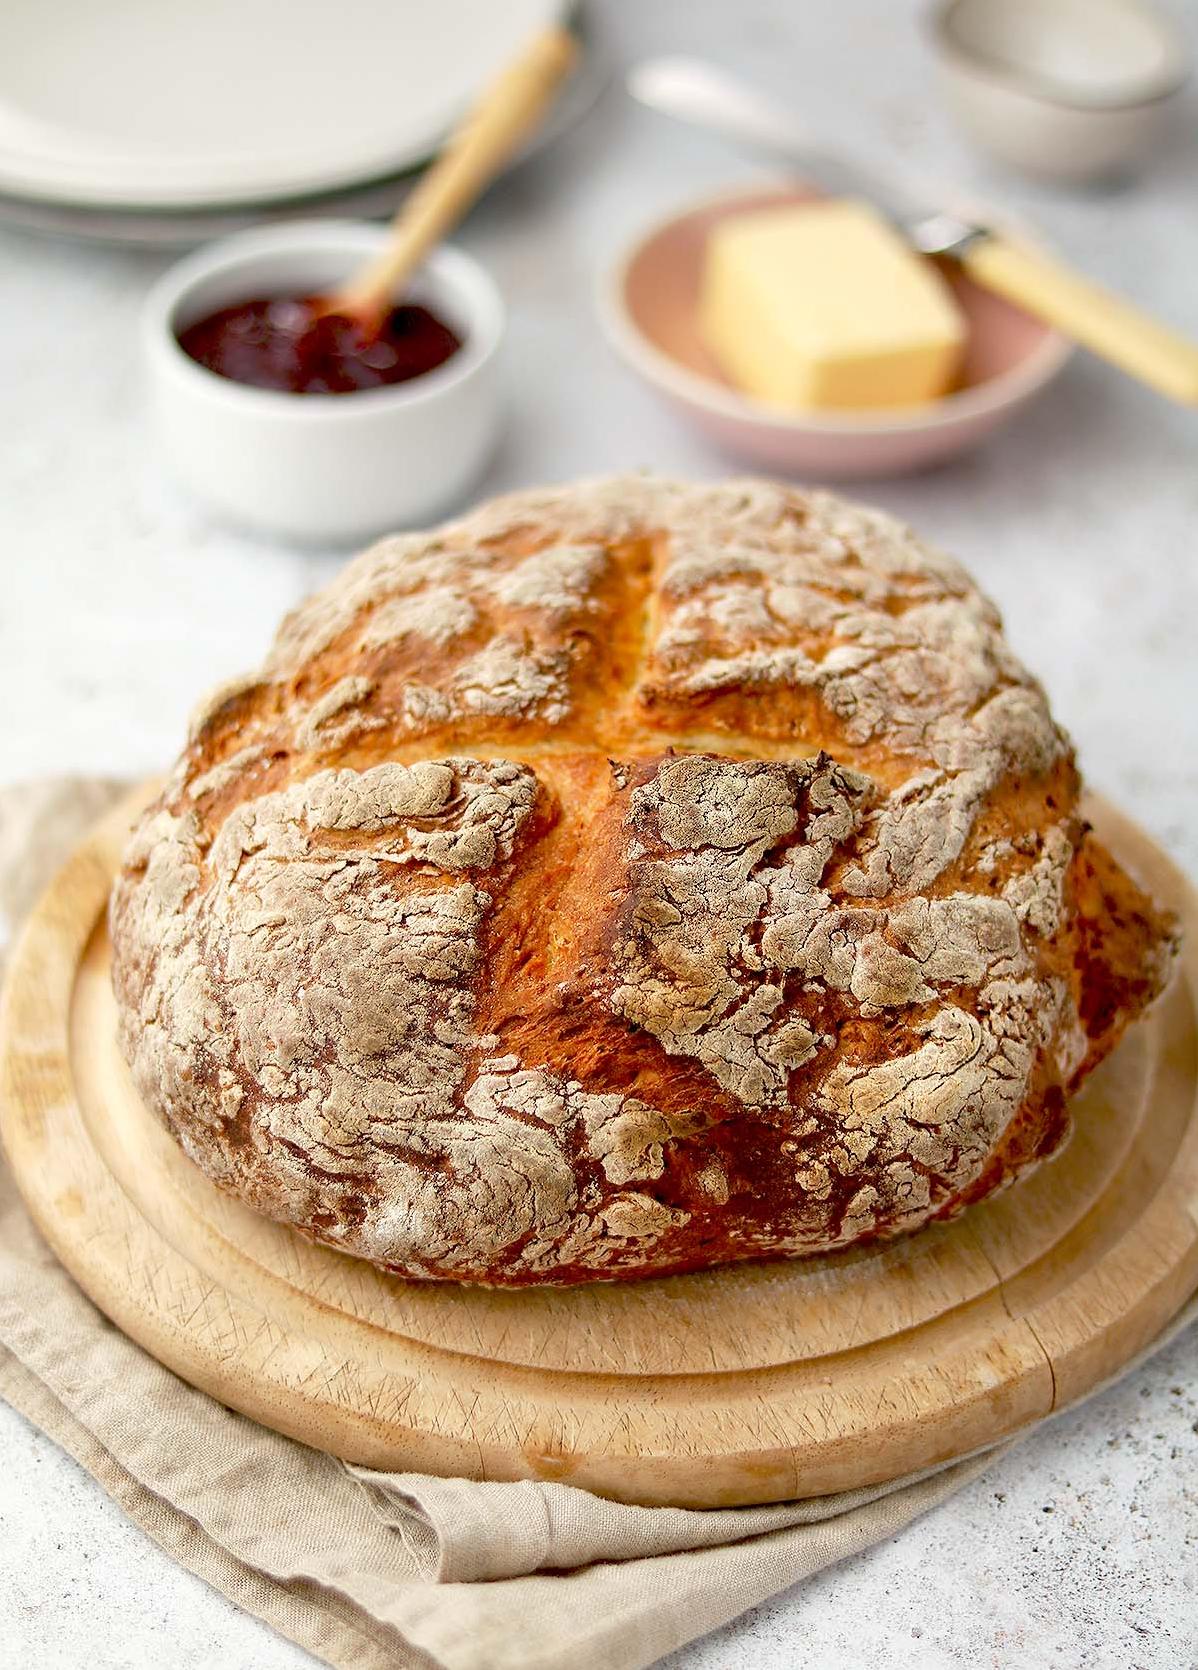  Nothing beats the smell of a homemade loaf of bread, like this traditional Irish soda bread.